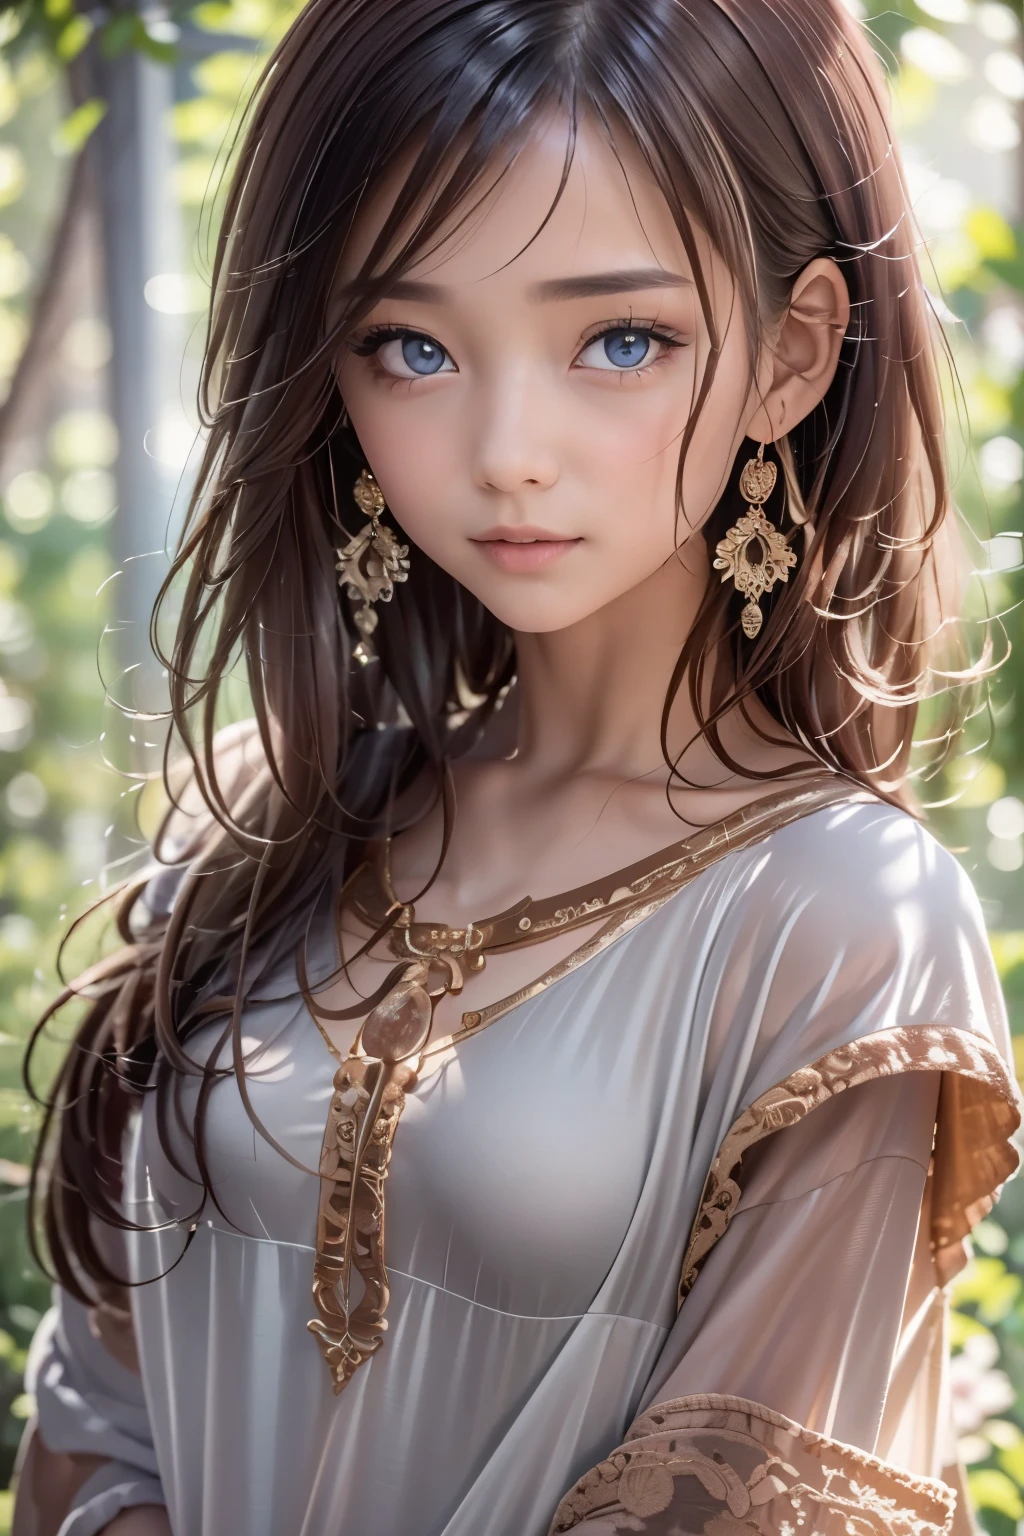 highest quality, realistic, 8K, High resolution, full color, 1 girl, woman, 15 years old woman, (pupil, light in the eyes), detailed beautiful face,beautiful skin,looking at the viewer:1.8, (1 girl eyes looking at the viewer:1.55), Upper body NSFW
